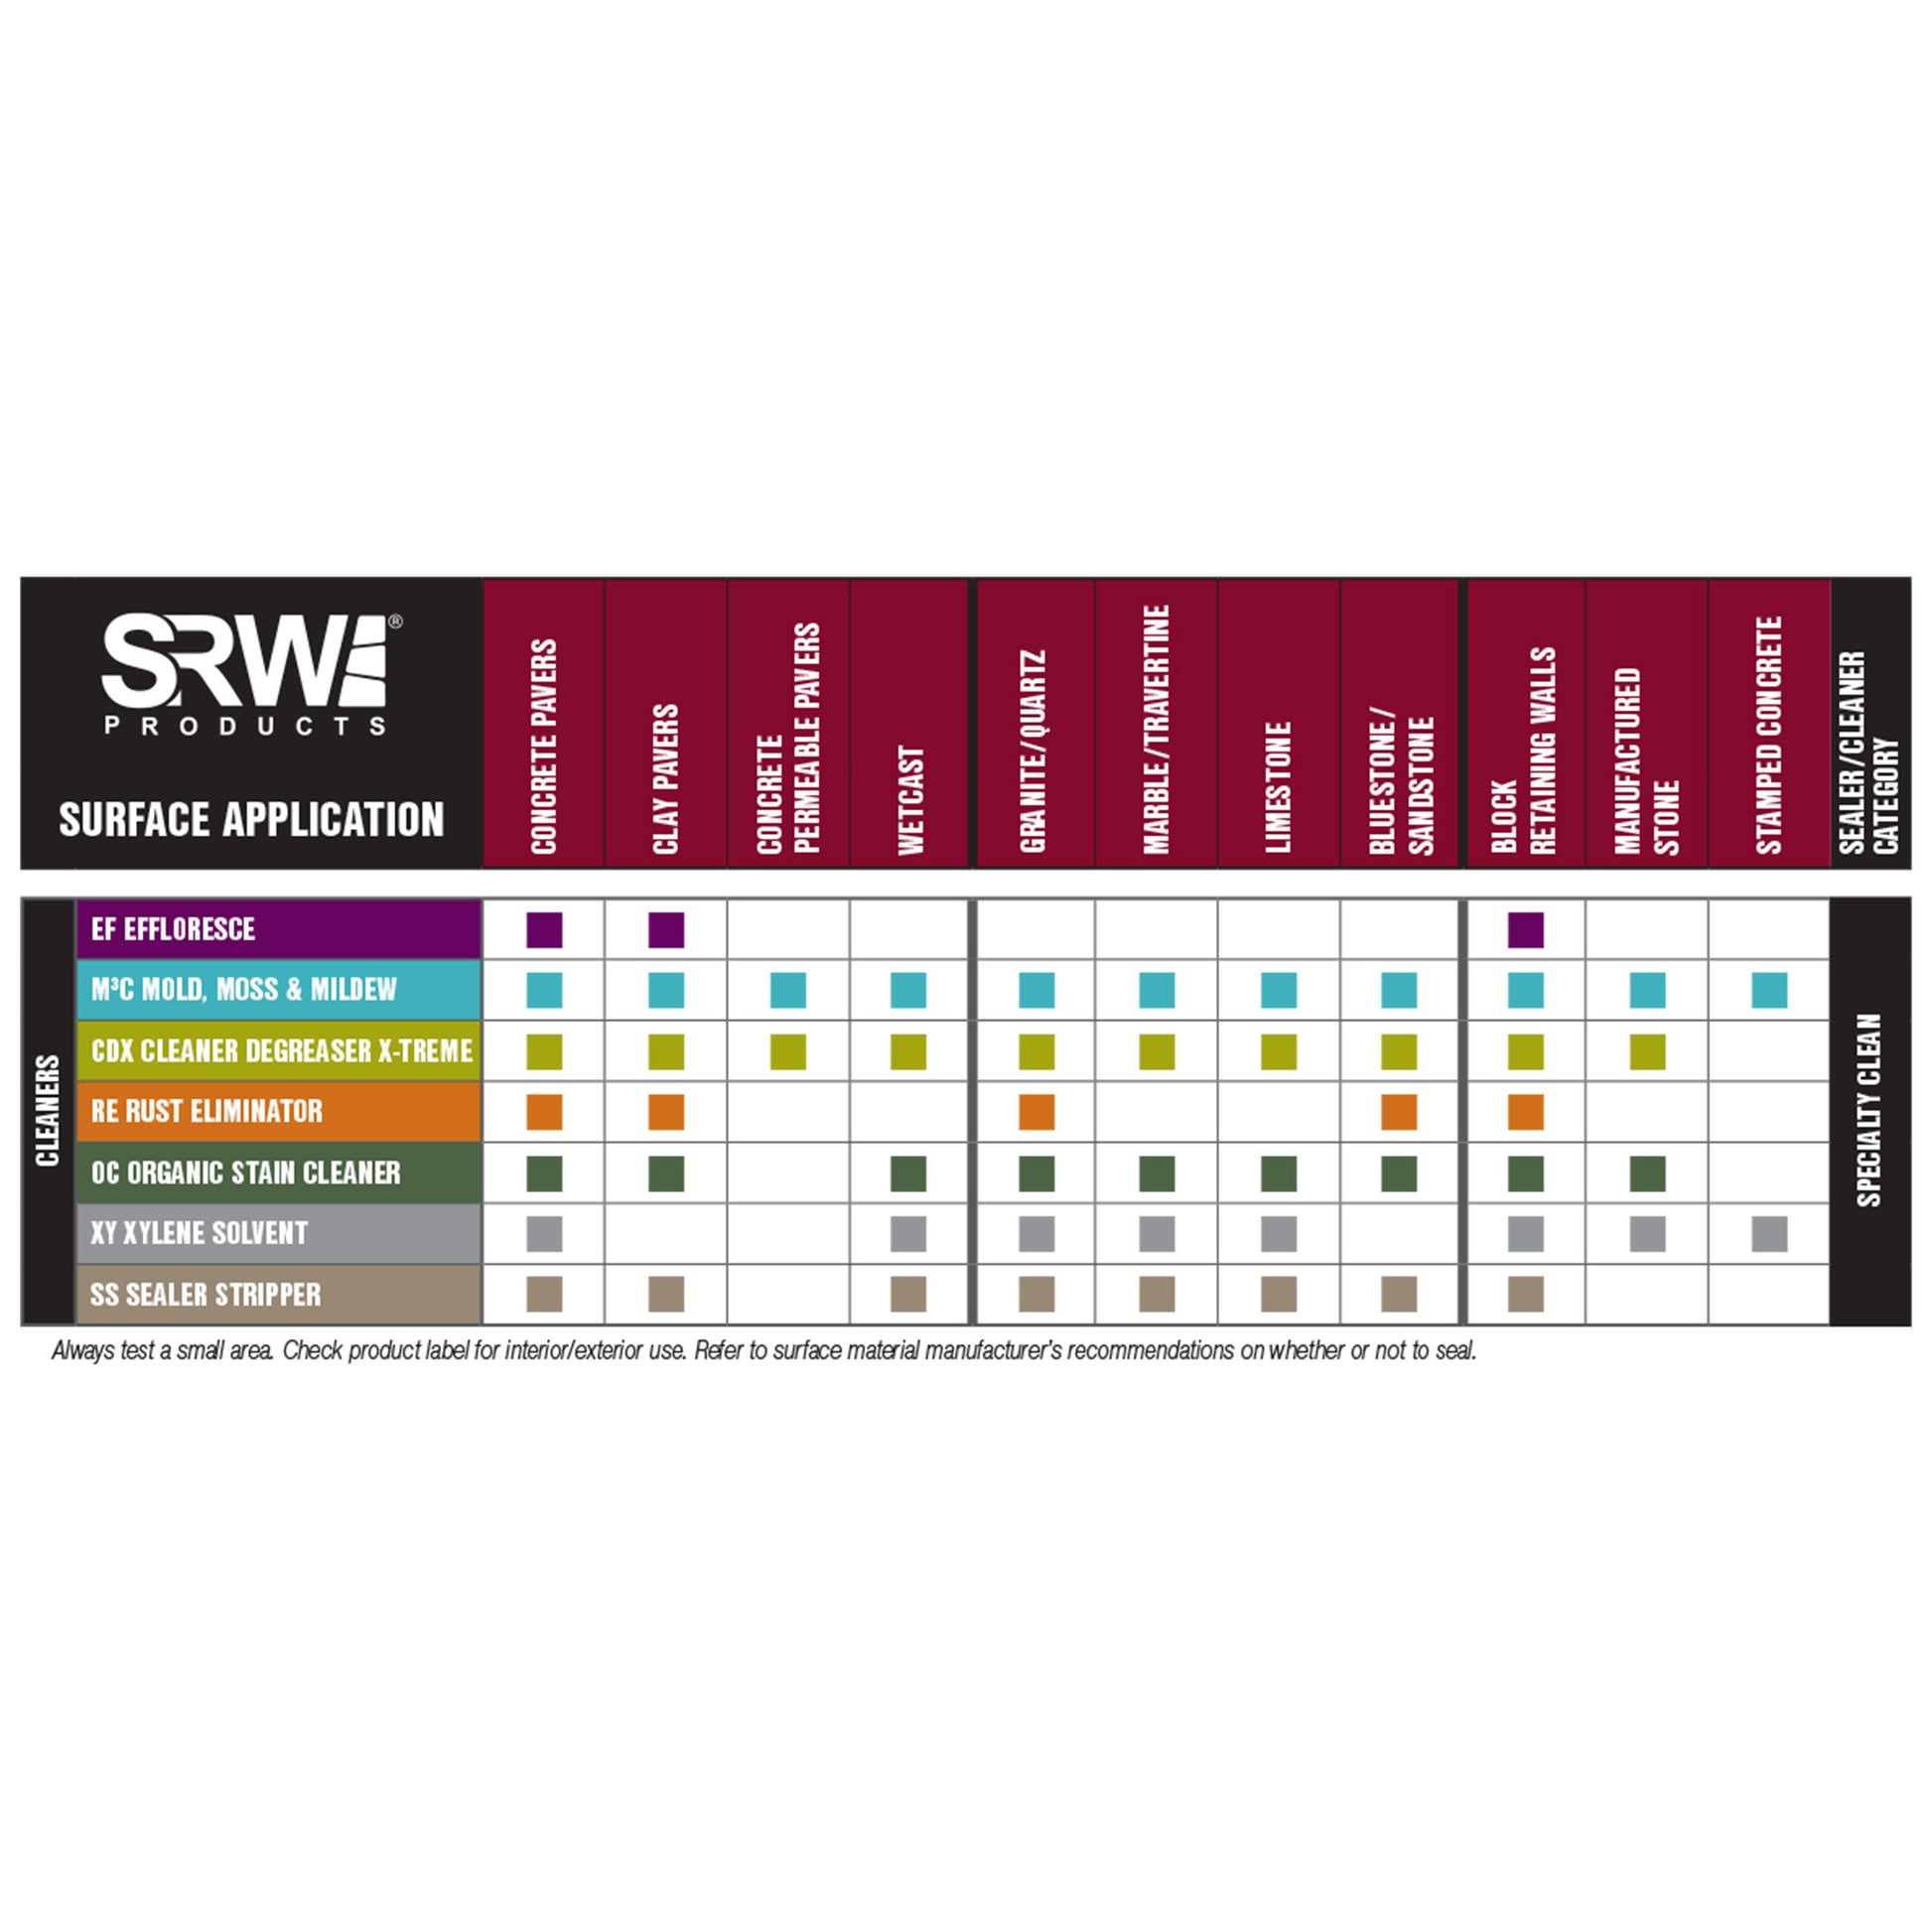 SRW Products specialty cleaners chart